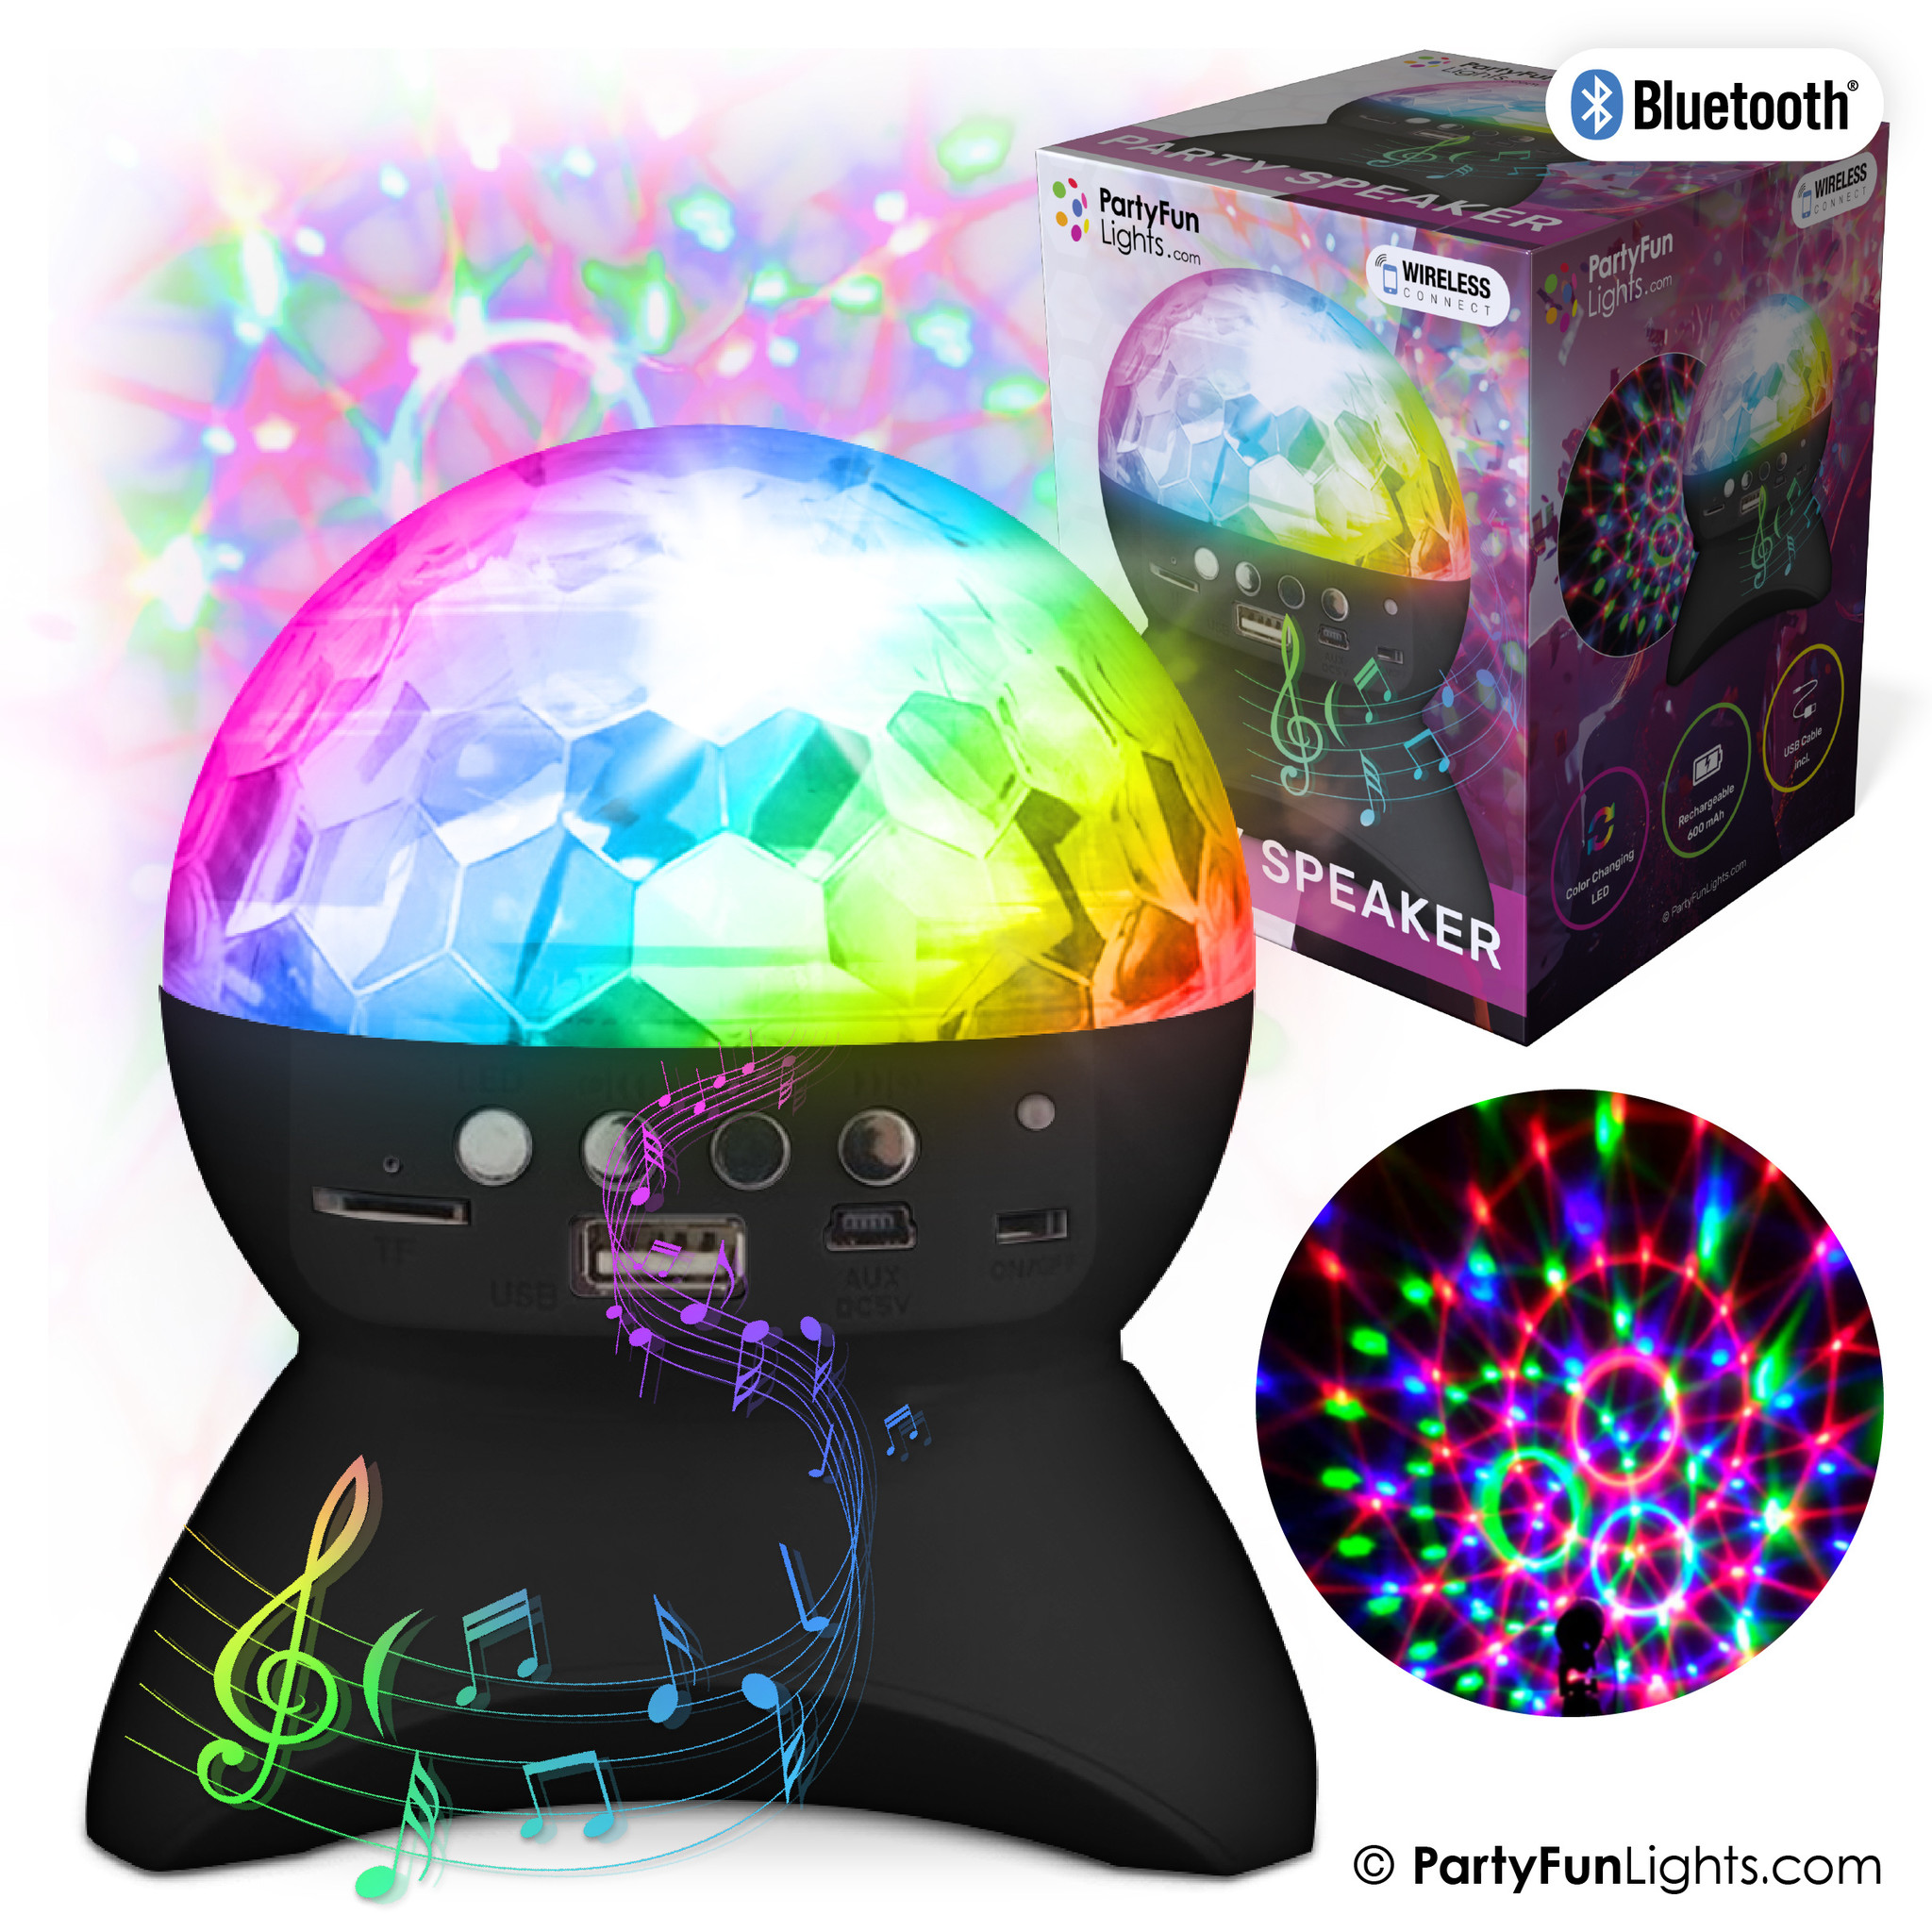 Bluetooth Speaker with Light Effects - PartyFunLights